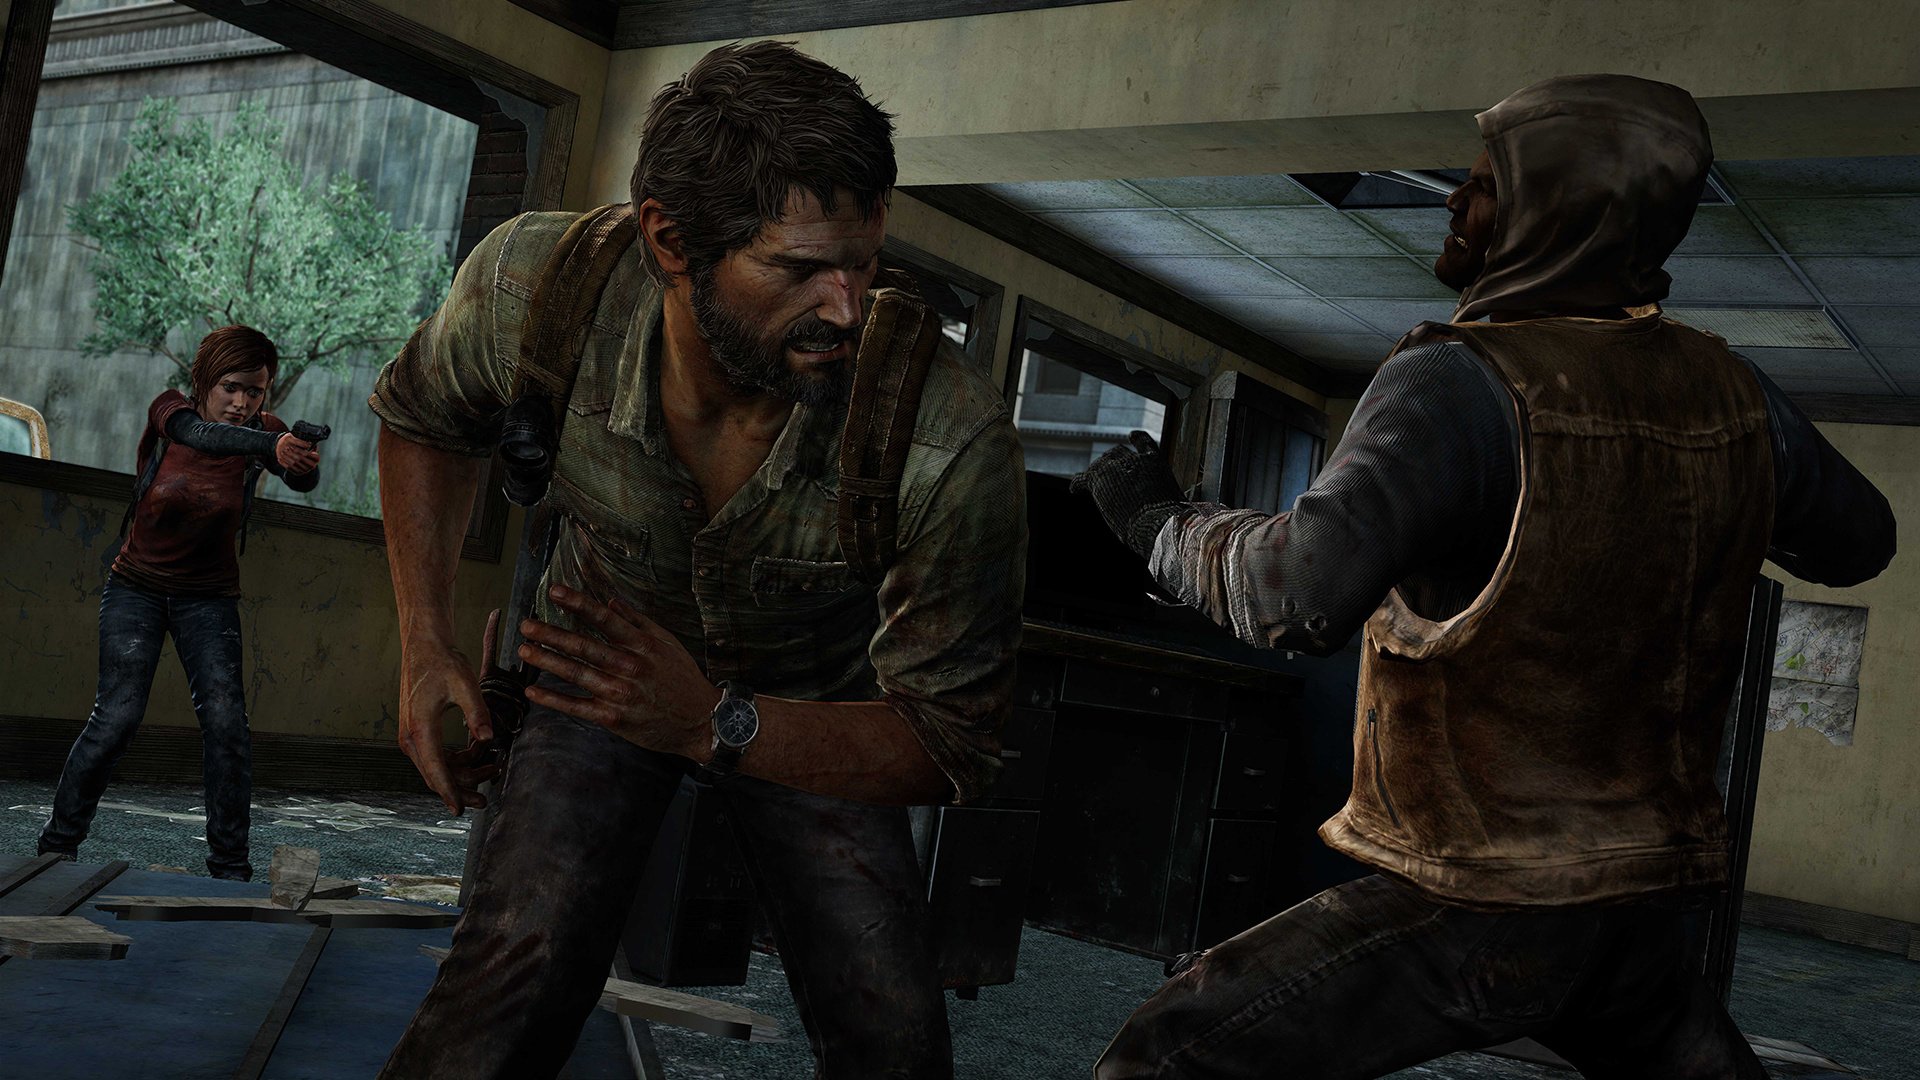 The Last of us: Remastered (PS4), Análise